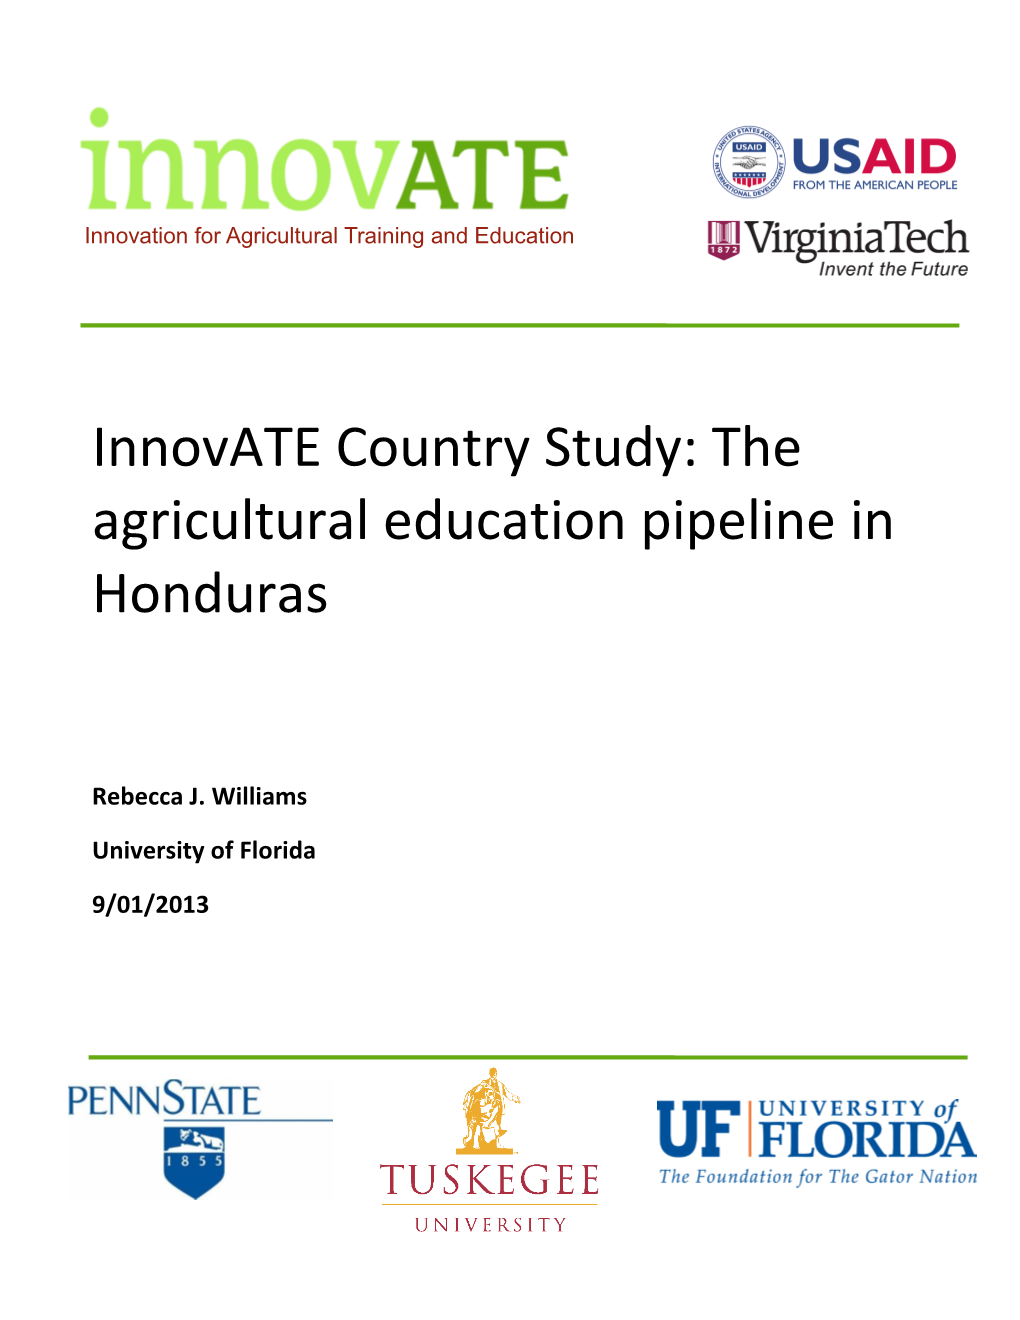 Innovate Country Study: the Agricultural Education Pipeline In